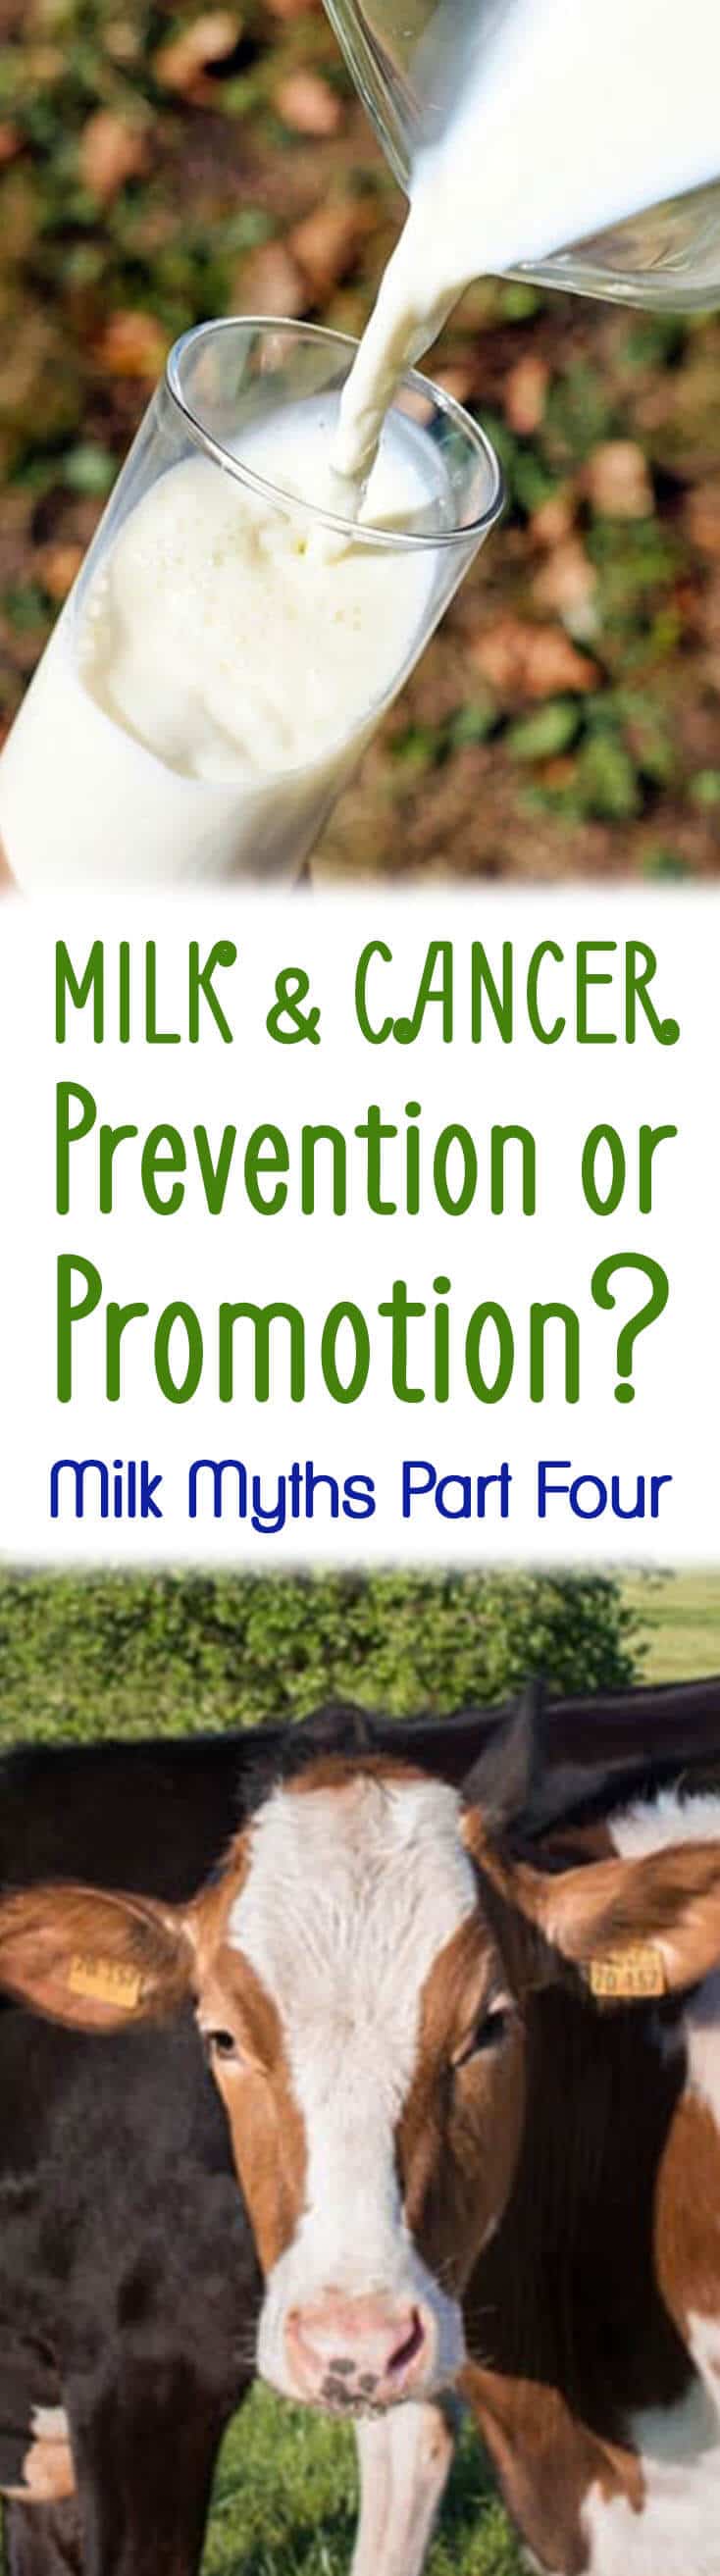 In part 4 of Dairy Myths, we discuss the questions about milk and cancer - is their a connection, does it seem to prevent or promote it?